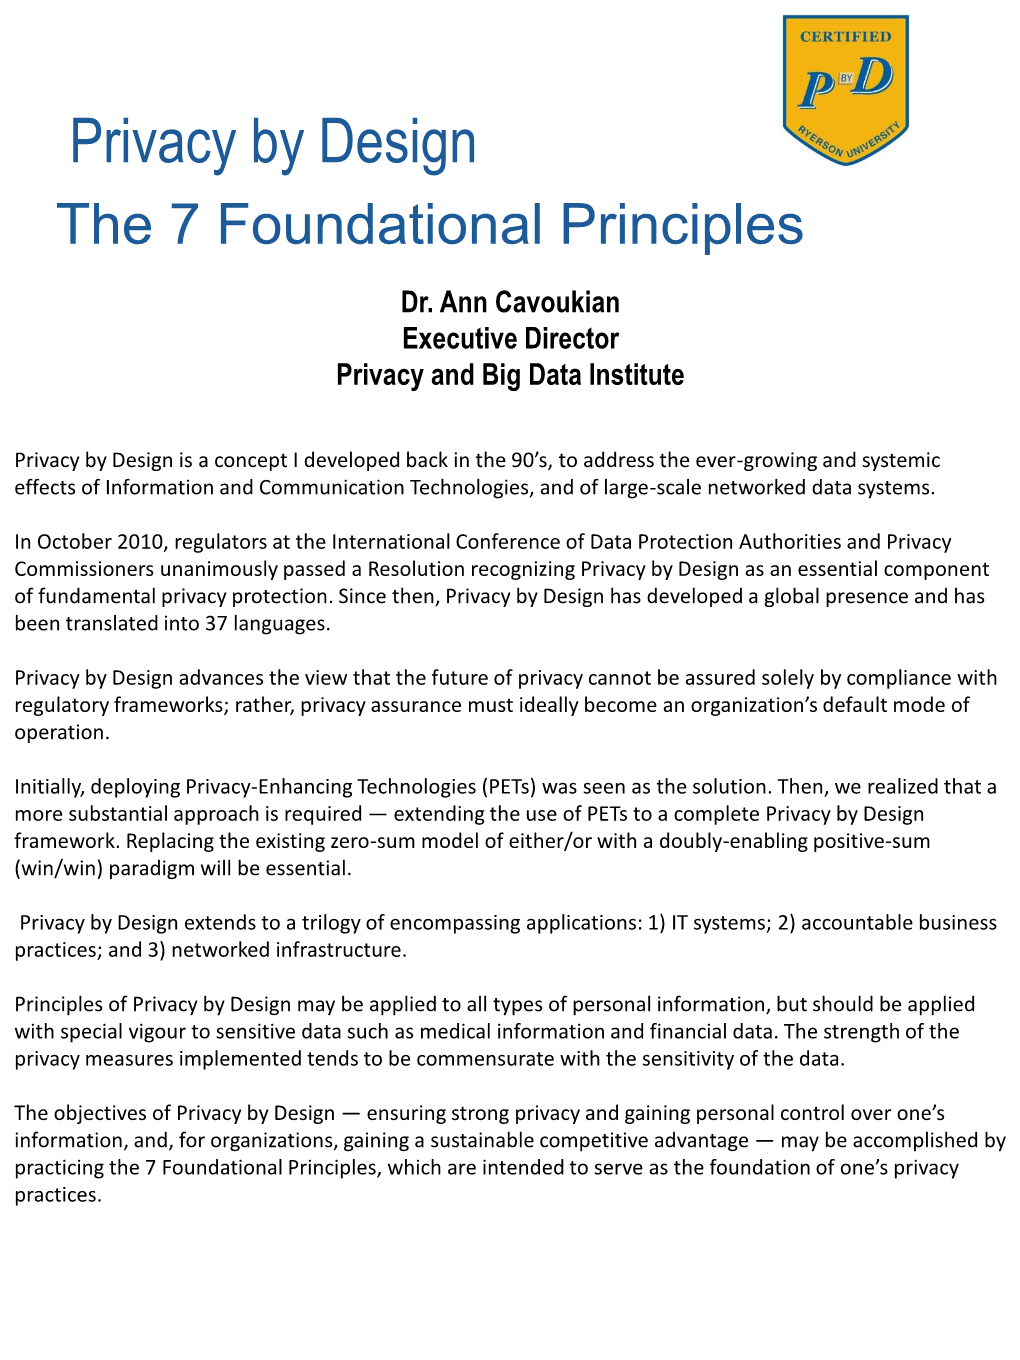 Privacy by Design – the 7 Foundational Principles